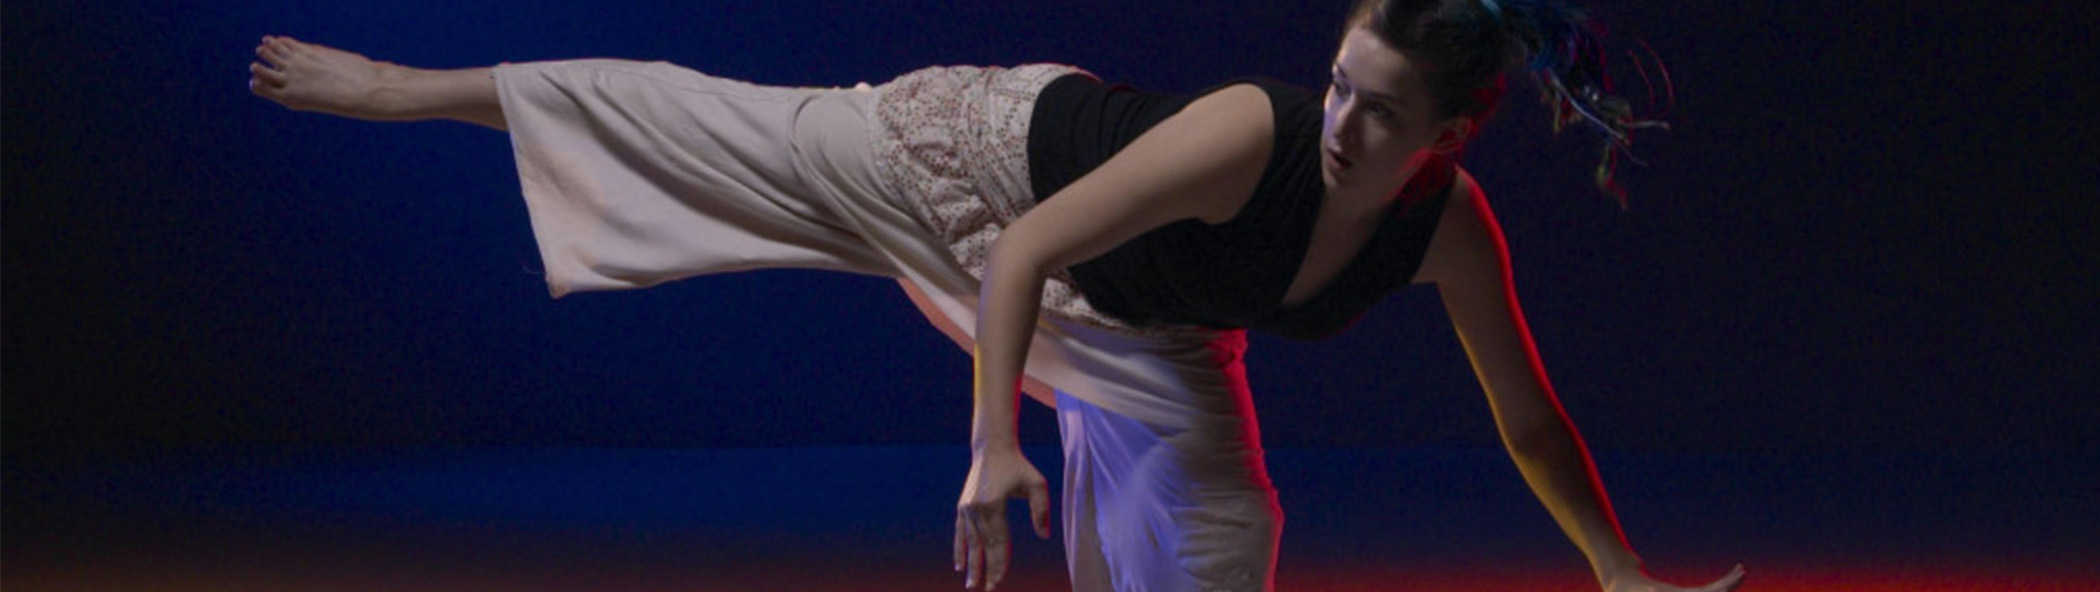 A dancer, Julia, in cream colored pants and black shirt. Extends her right leg out laterally and counter balances by leaning her upper body over to the other side. She’s lit by red and white lighting and a dark blue backdrop lies in the background.